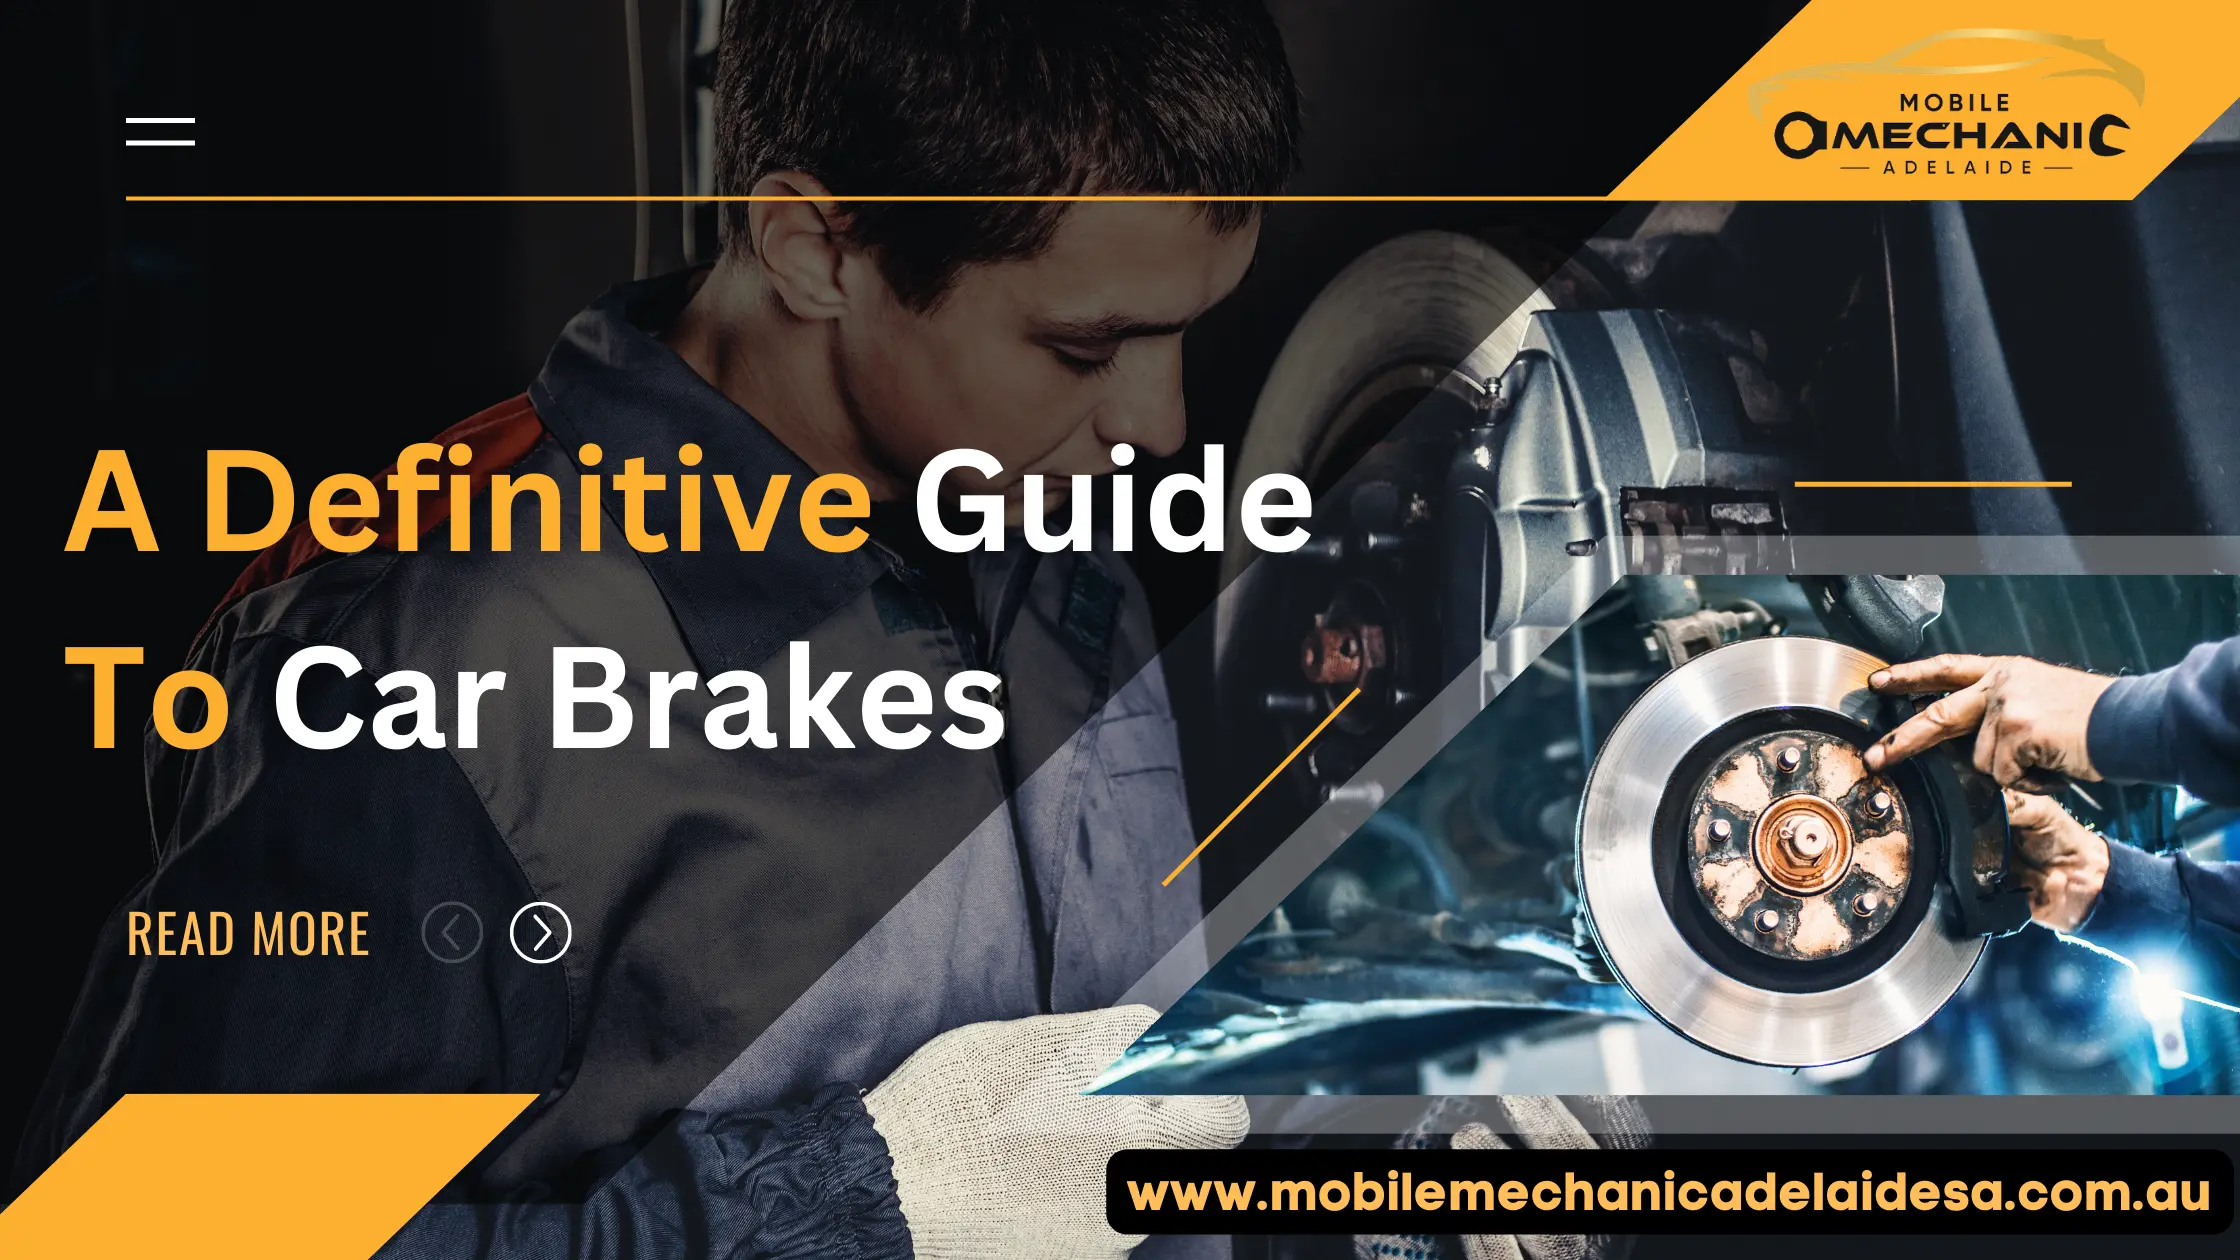 A Definitive Guide to Car Brakes